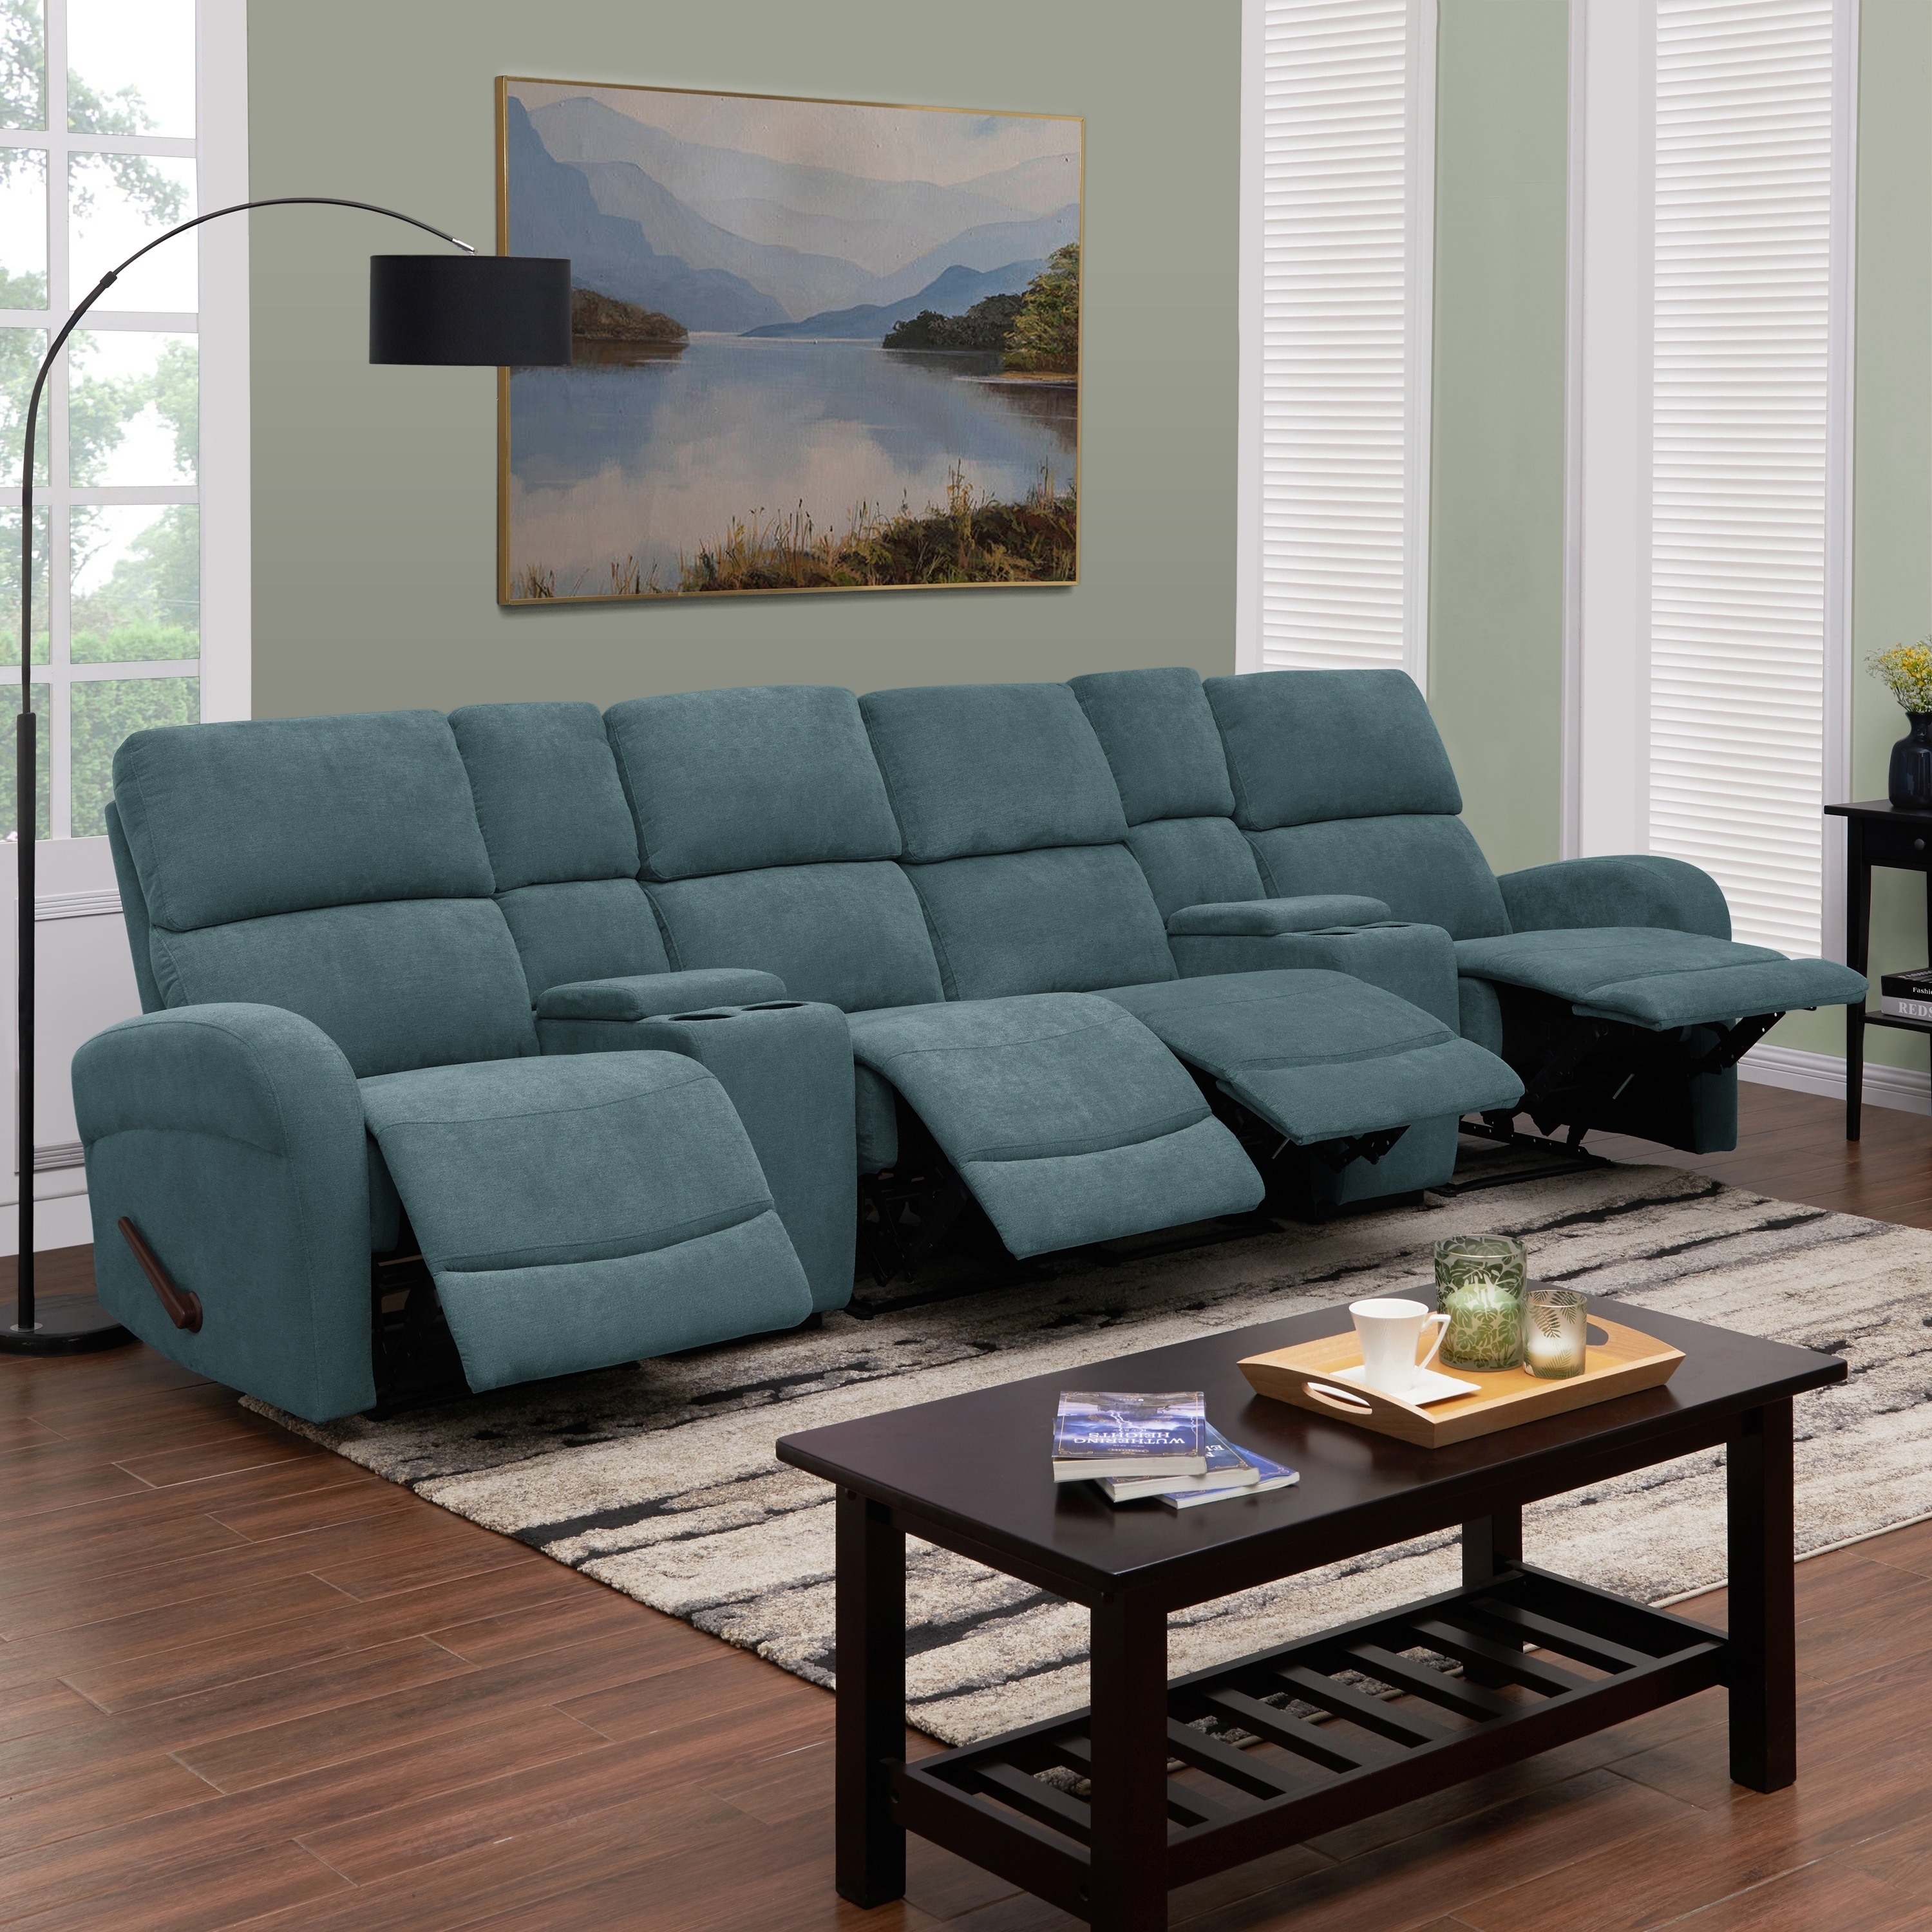 Shop ProLounger Medium Blue Chenille 4 Seat Recliner Sofa with Power